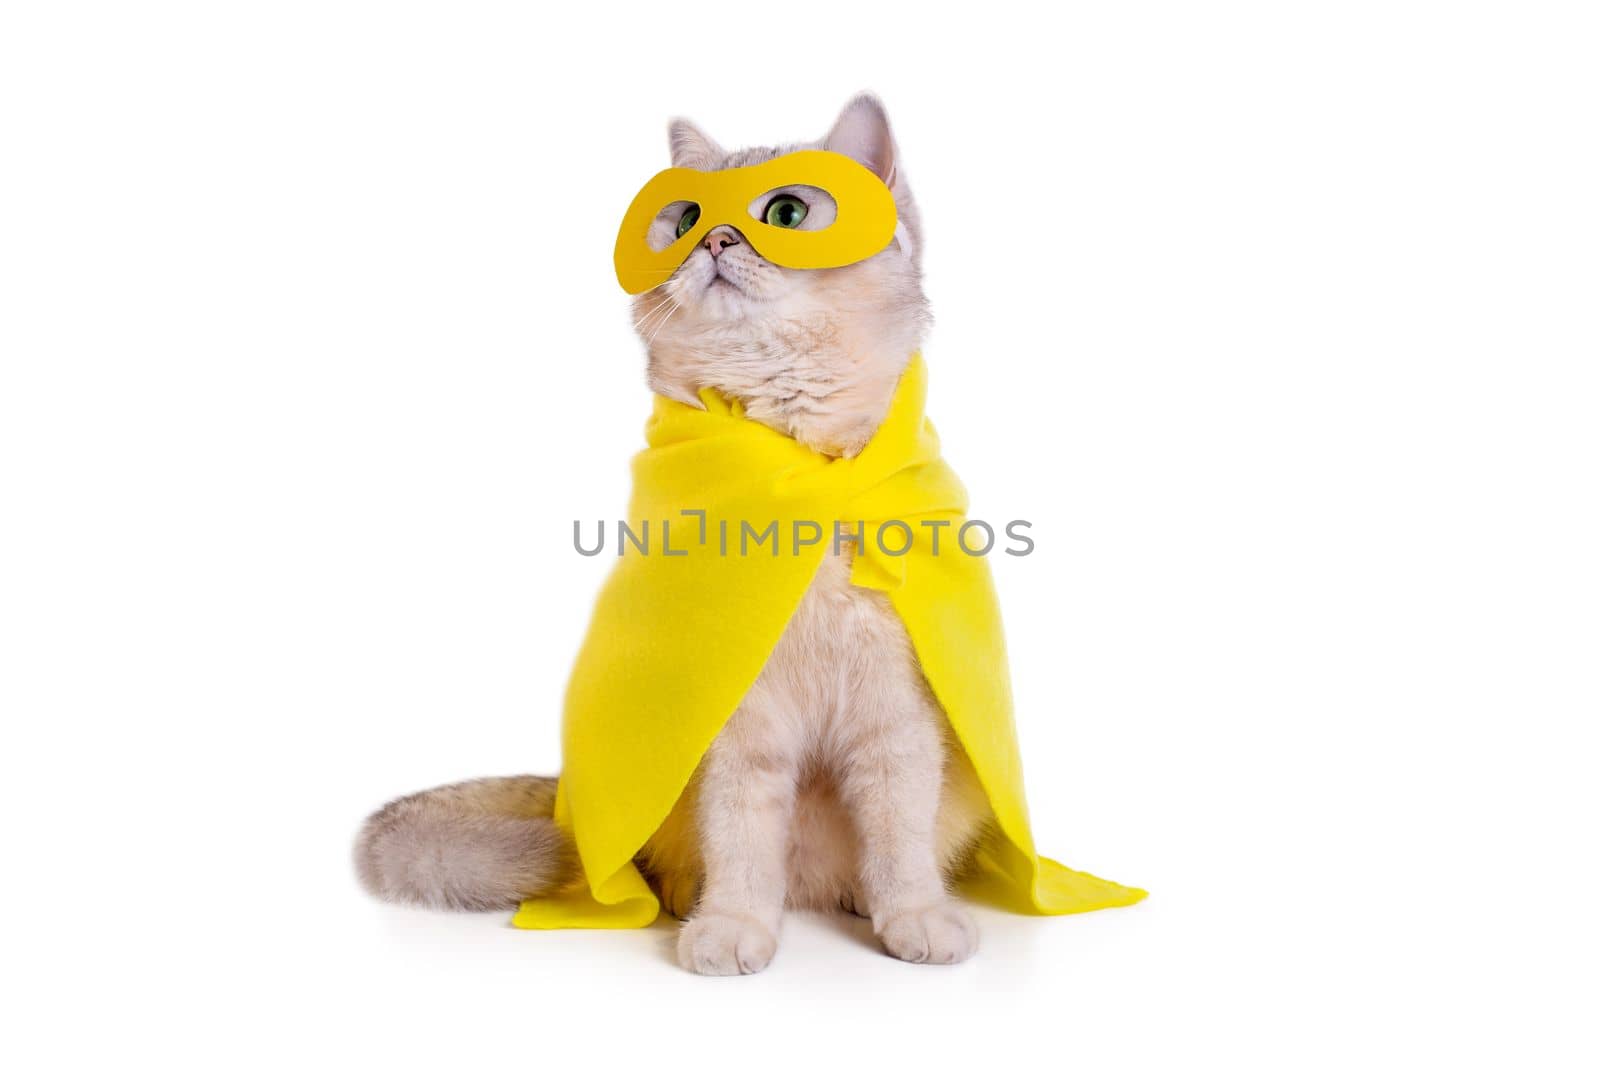 Cute white cat in a yellow superhero costume: yellow mask and cape, sitting on a isolated white background, looking up